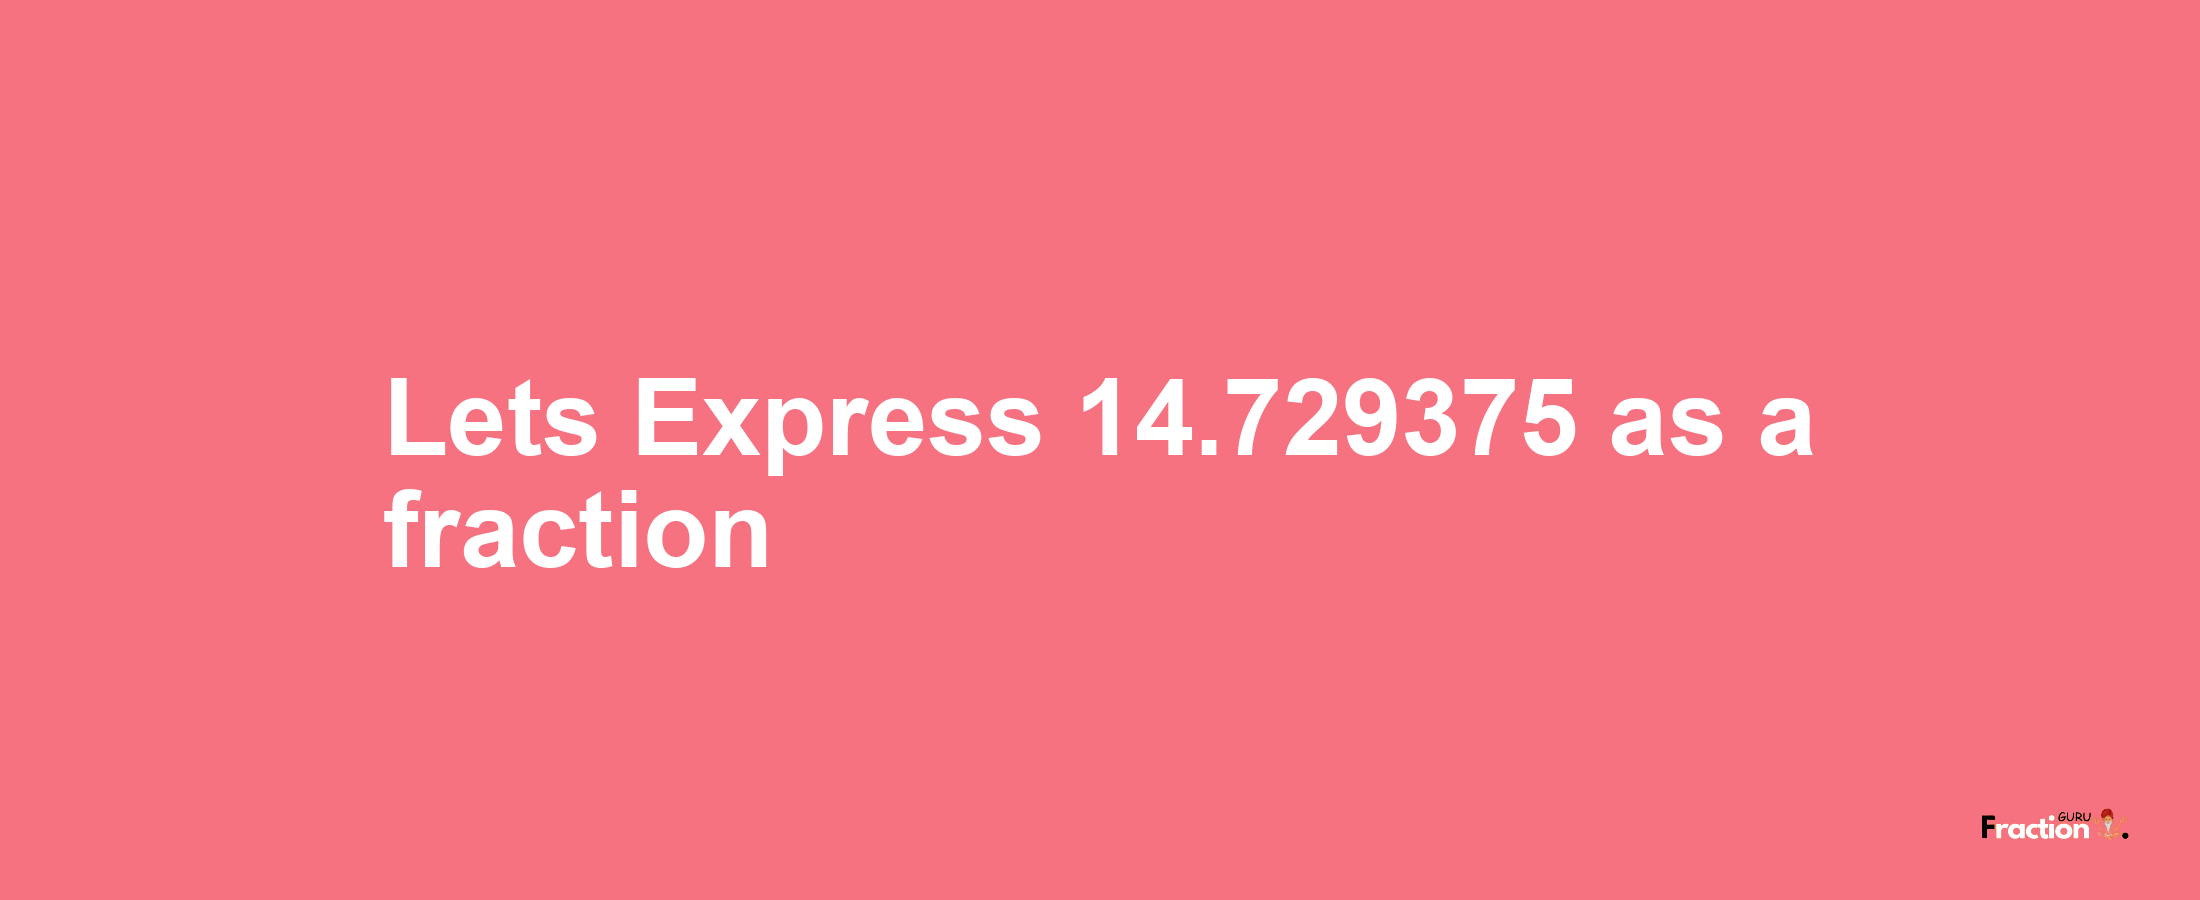 Lets Express 14.729375 as afraction